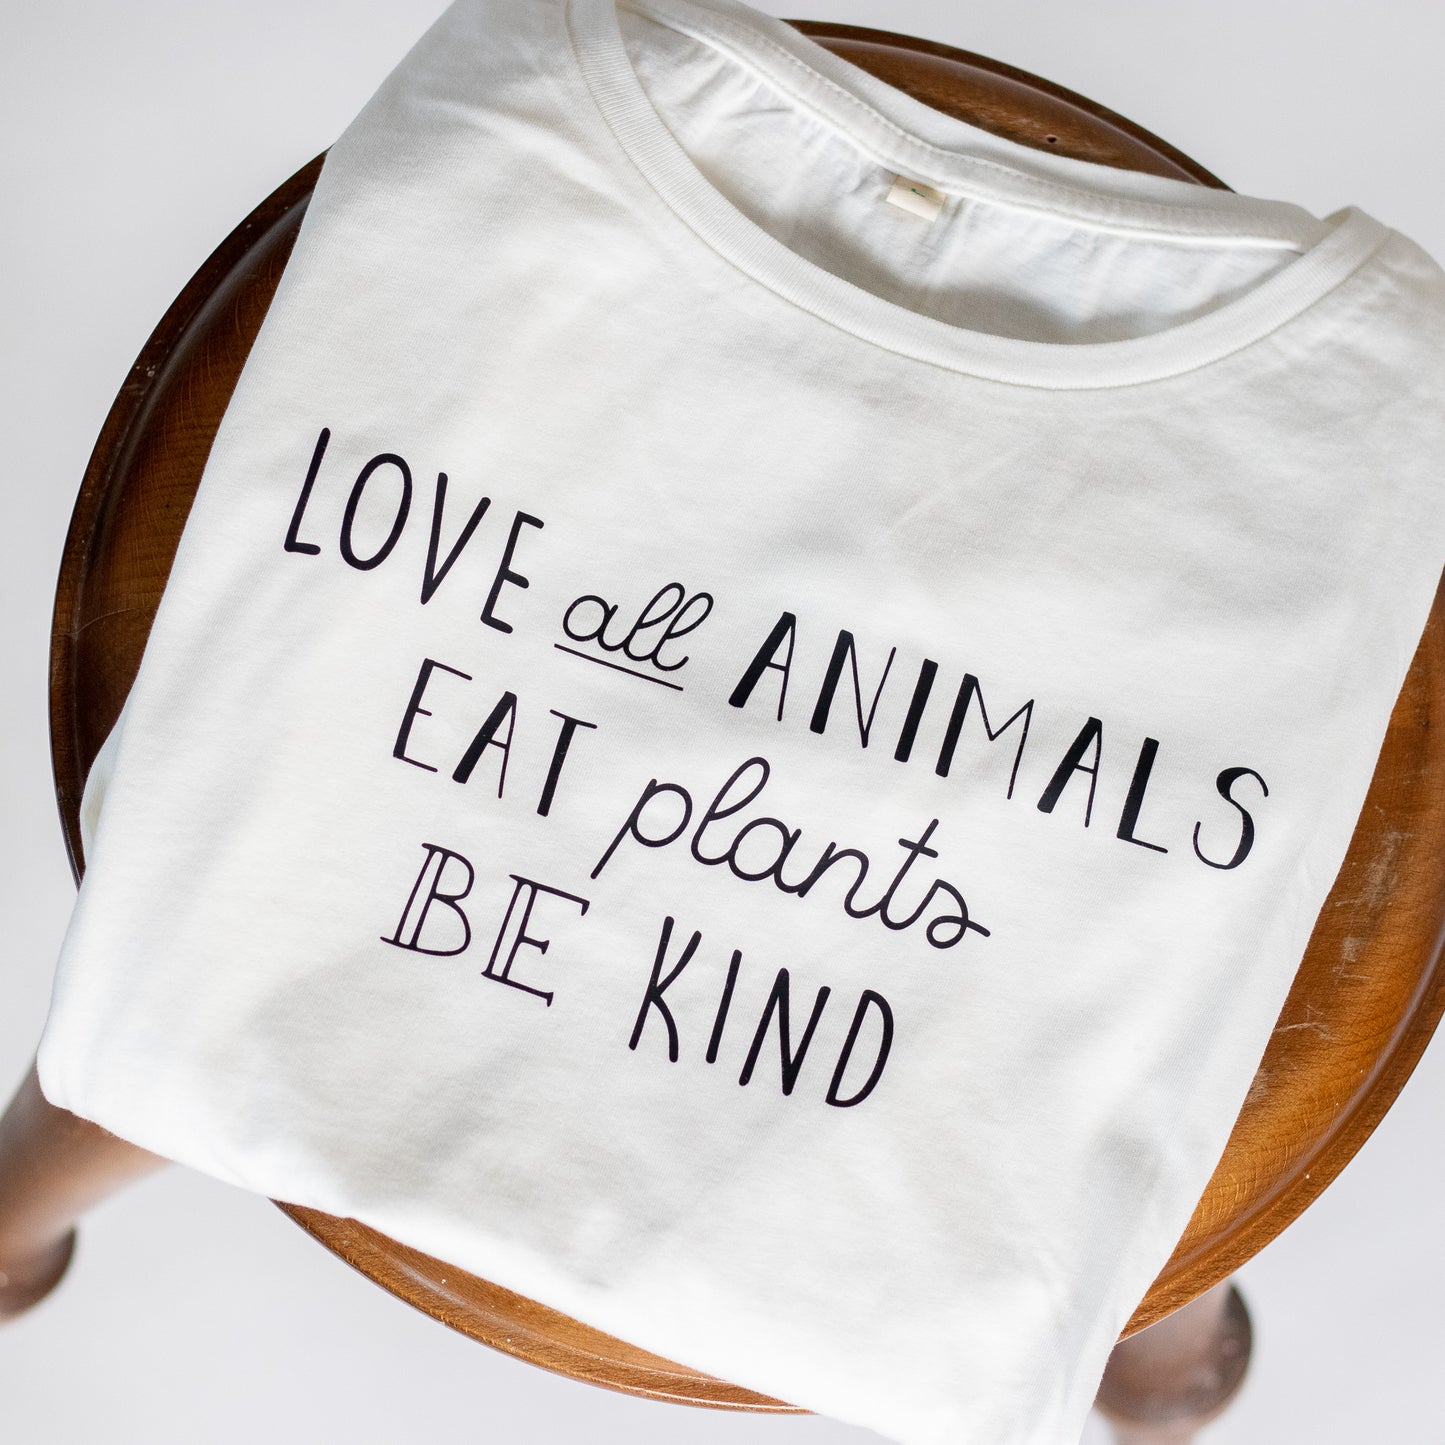 Cropped Shirt Love all animals